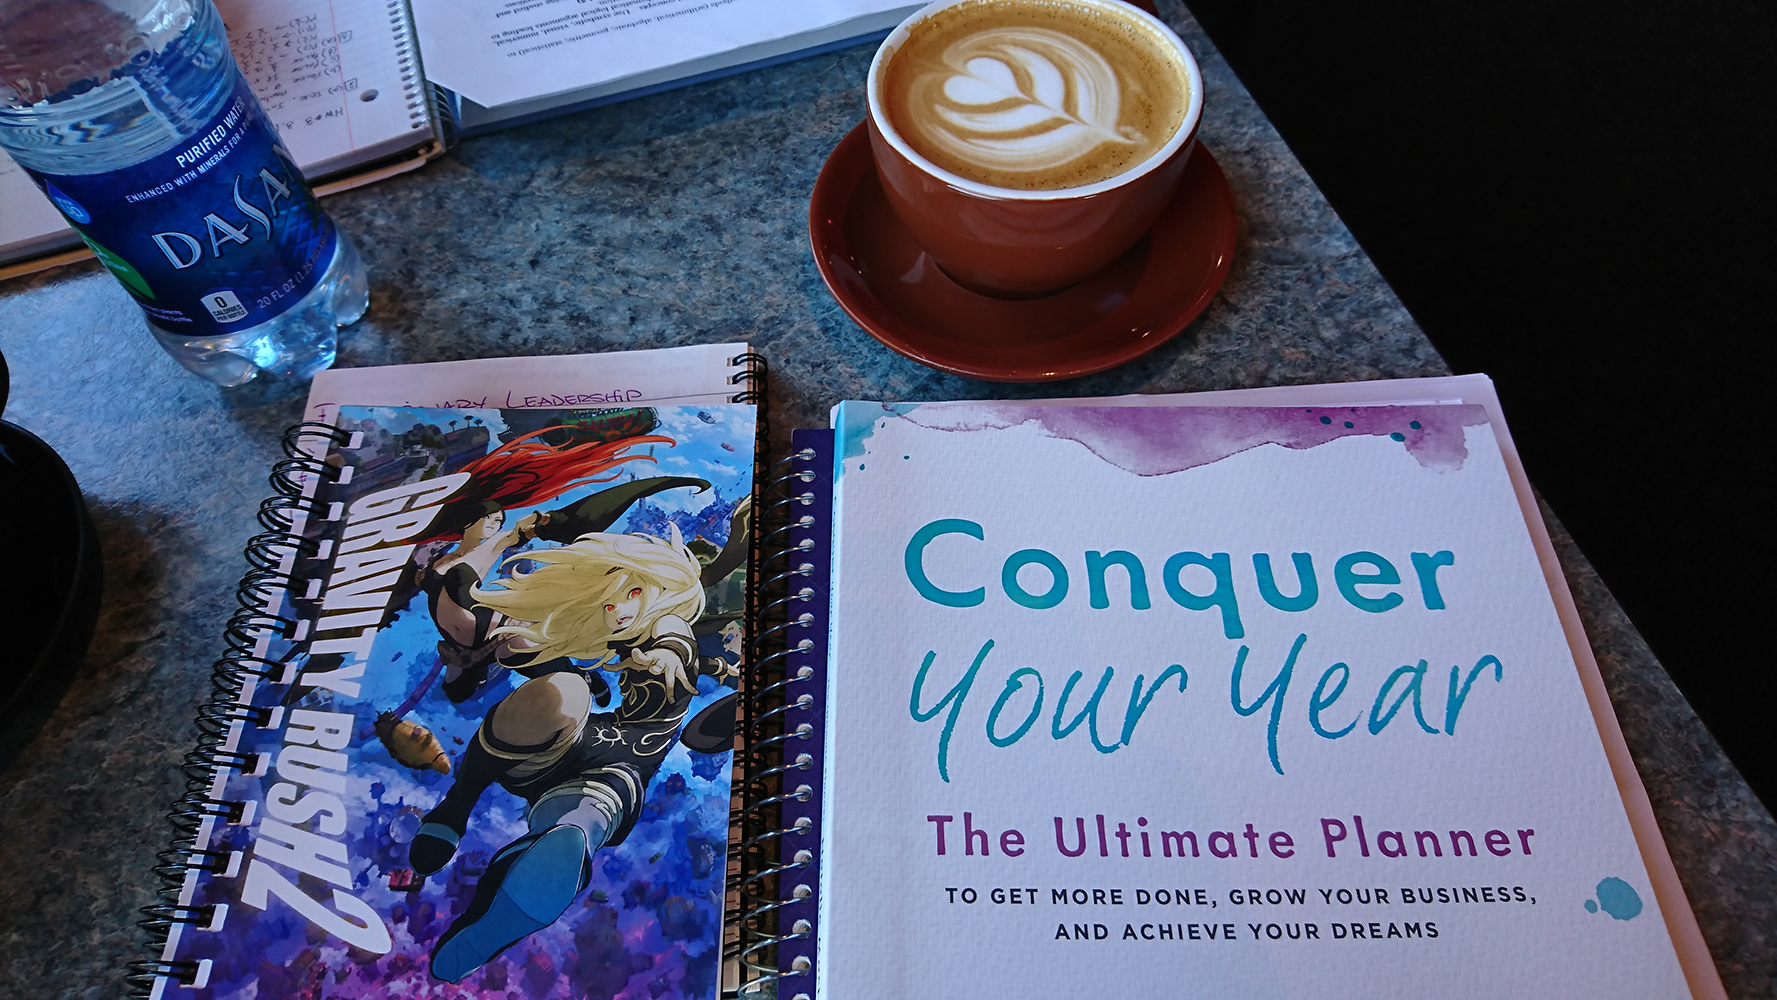 a cappuccino with a heart drawn in the milk next to books on a table. The books include notebooks and a yearly planner